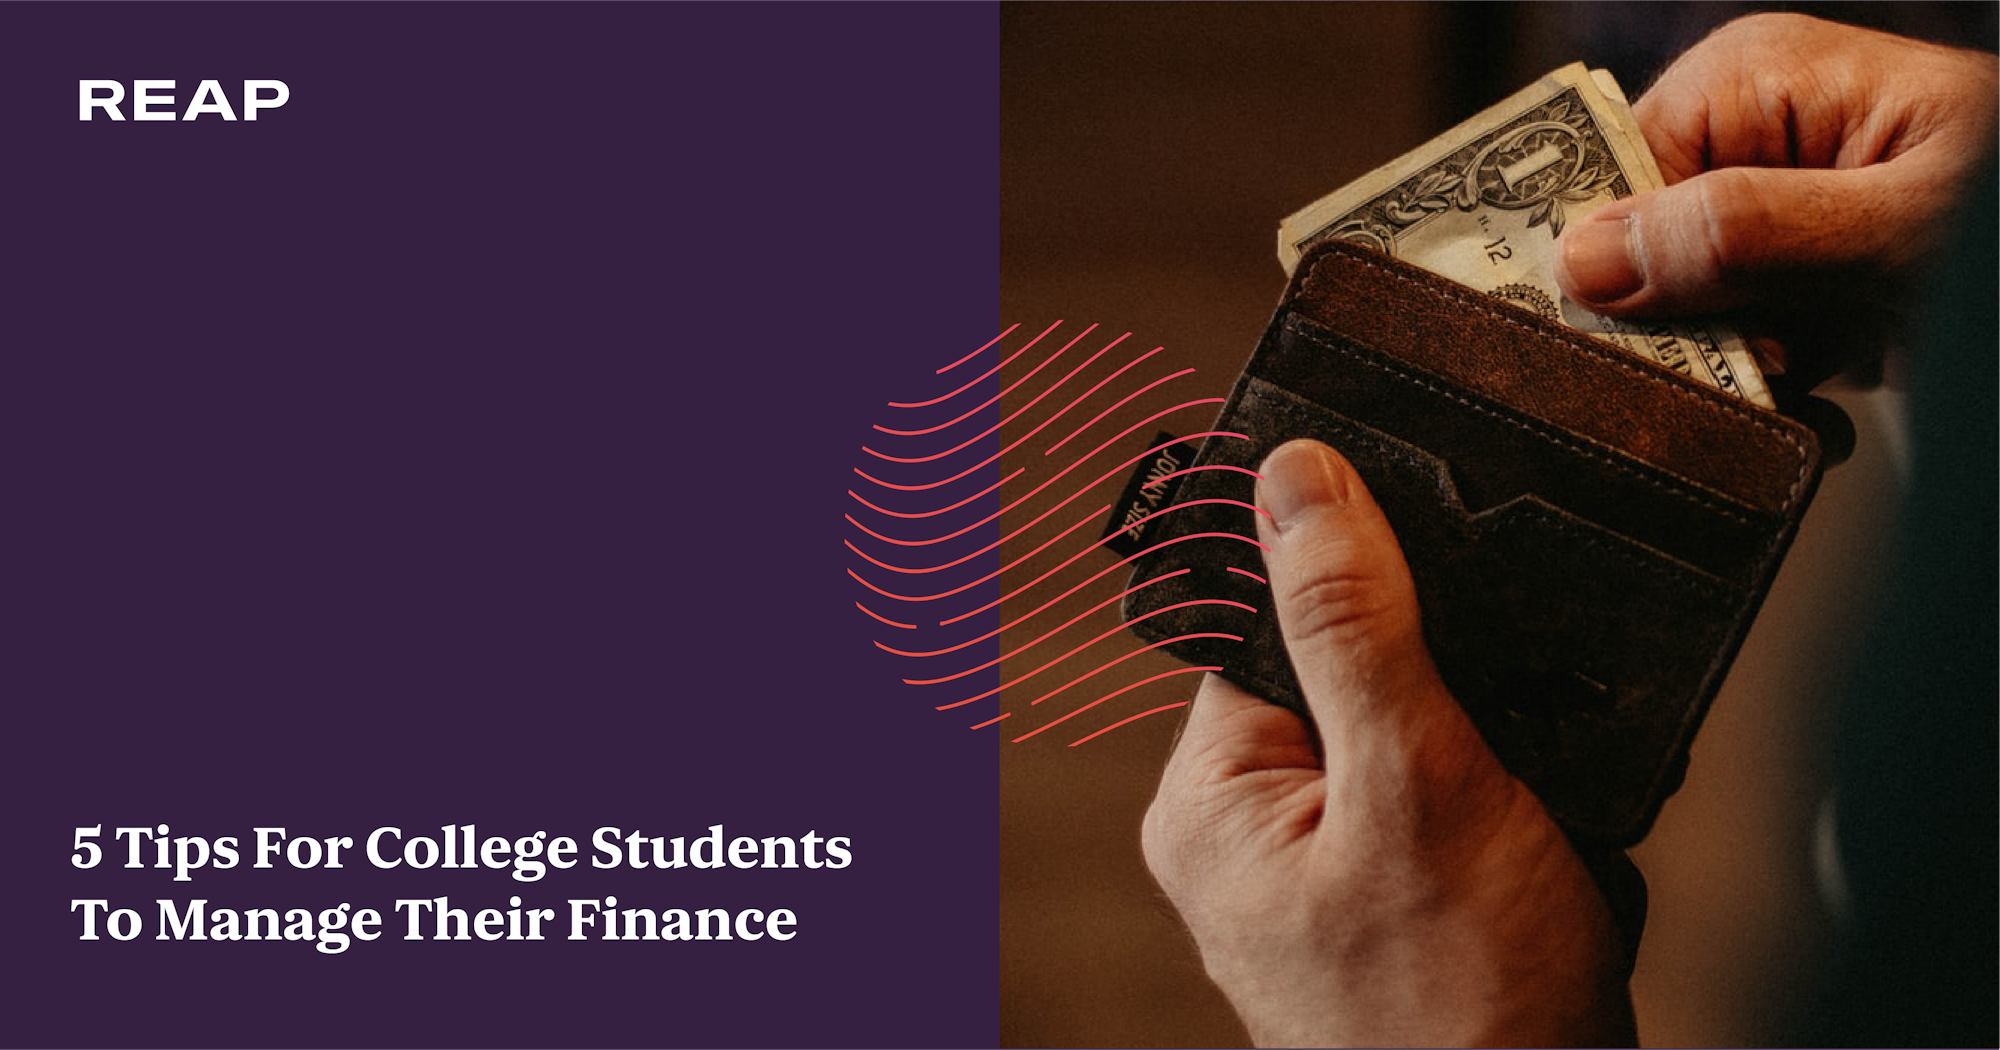 Cover Image for 5 tips for college students to manage their finance